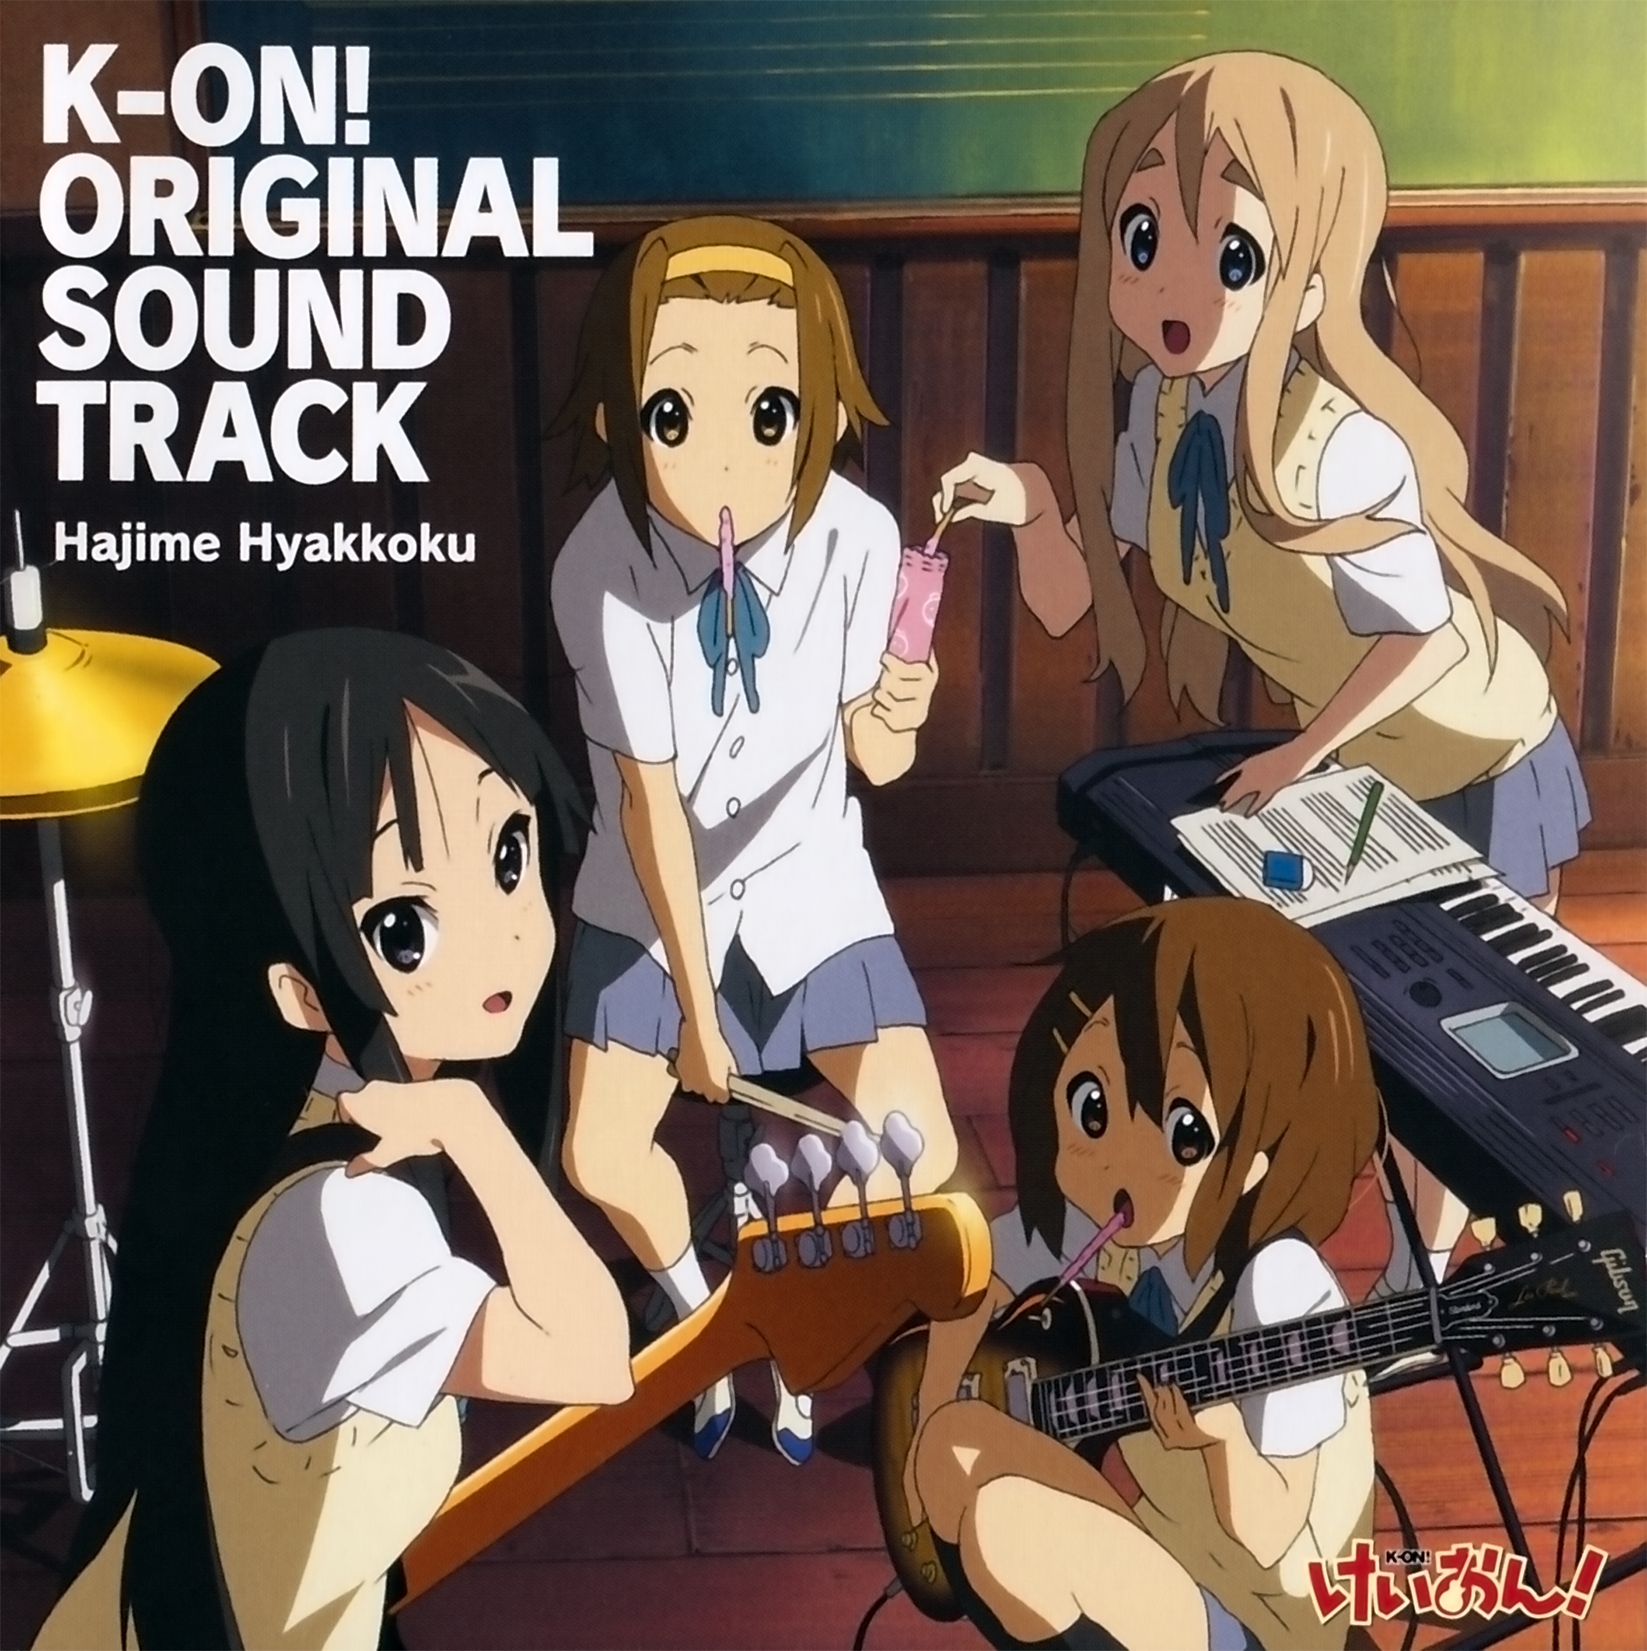 K-ON! Album is 1st Anime Character CDs to Top Weekly Chart - News